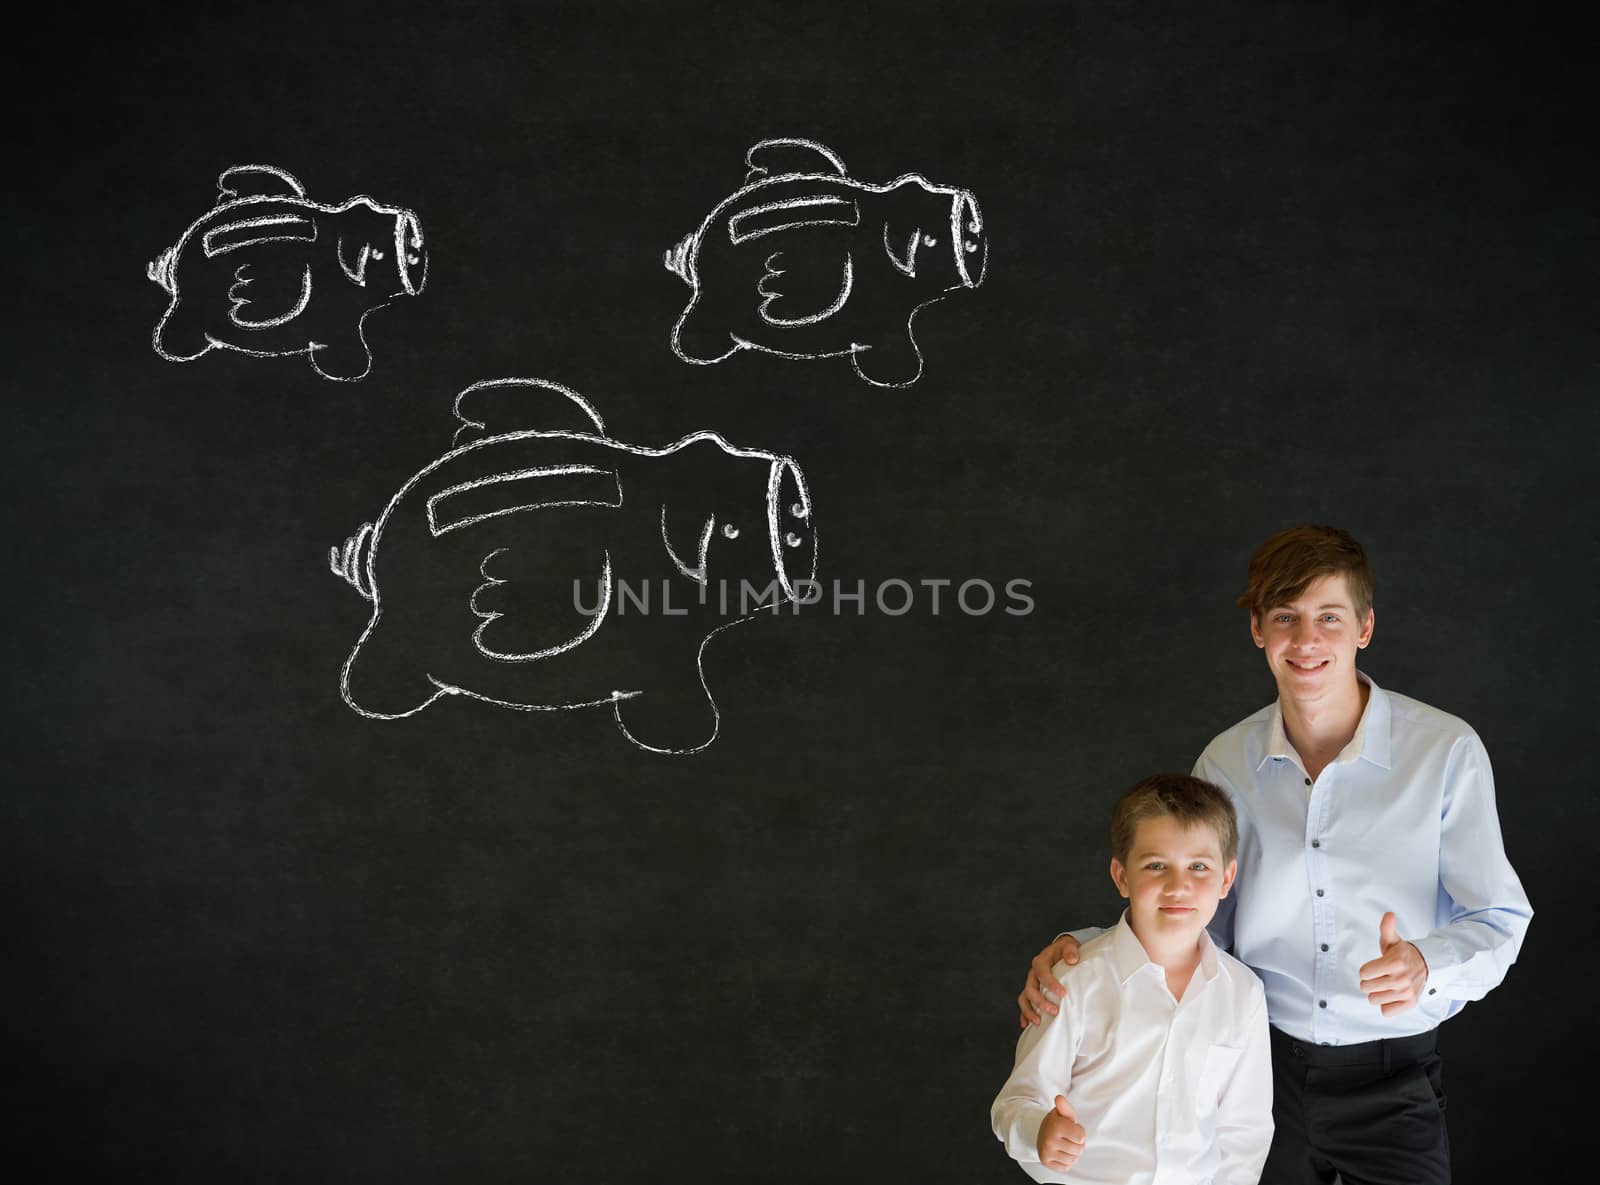 Young business boy with flying money piggy banks in chalk on blackboard background